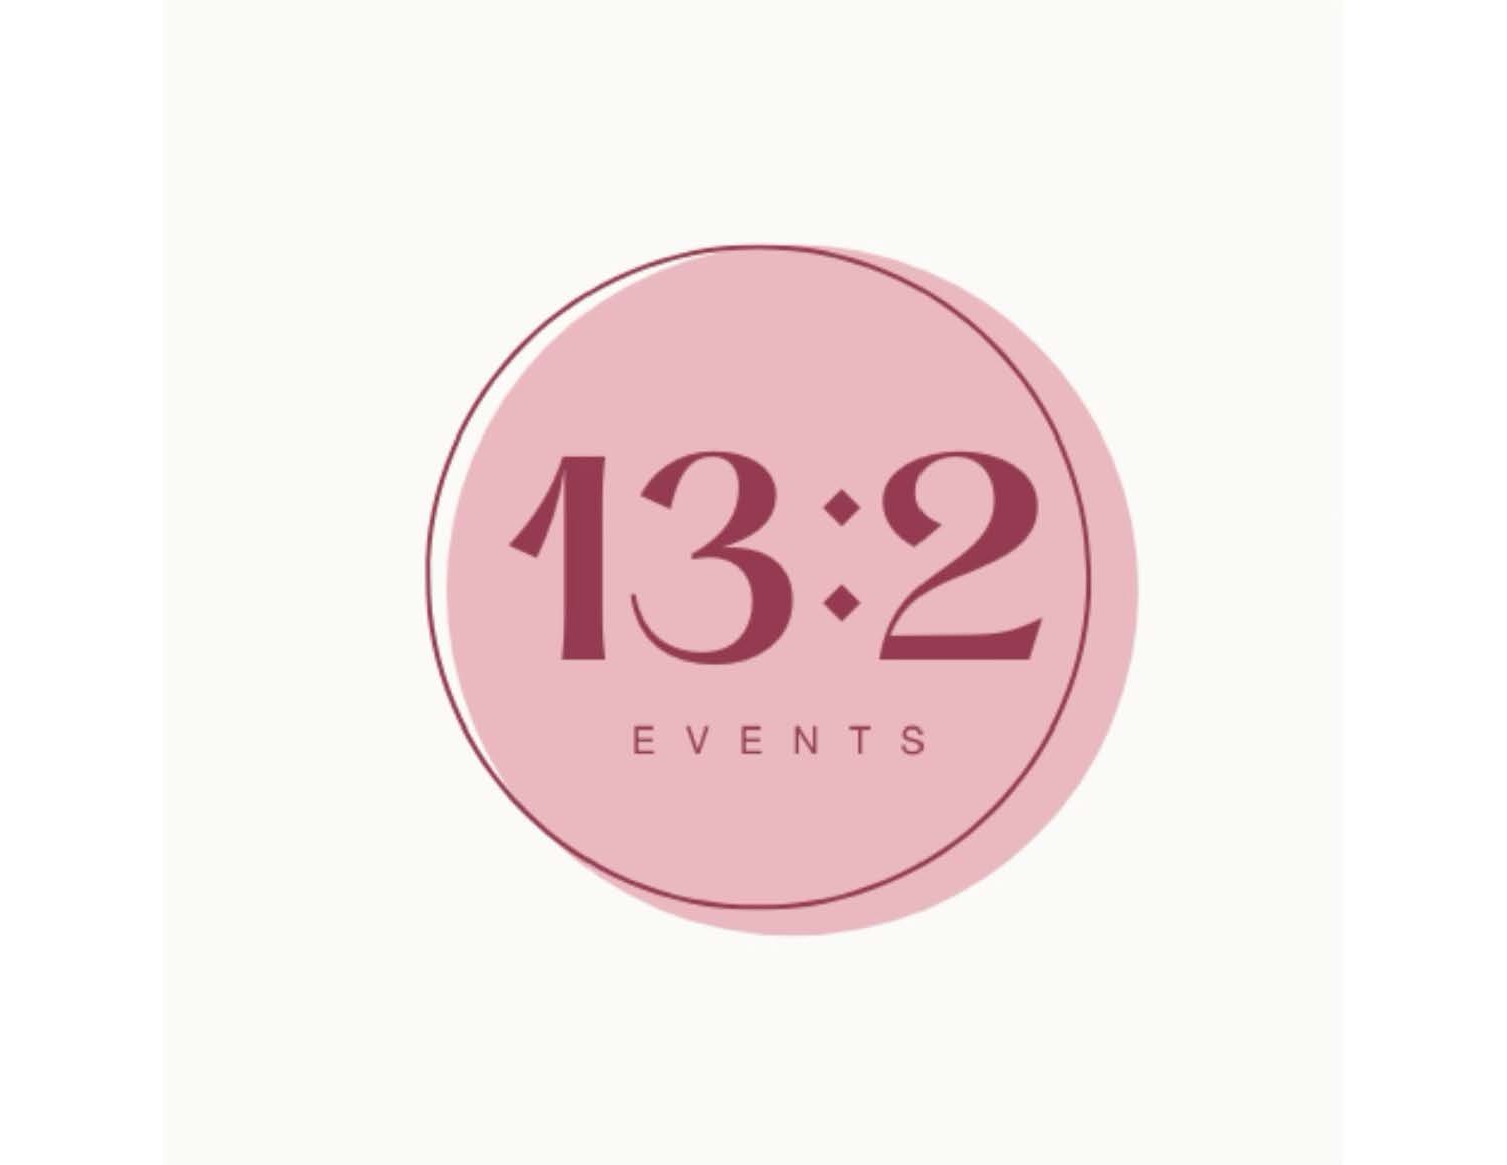 13:2 Events